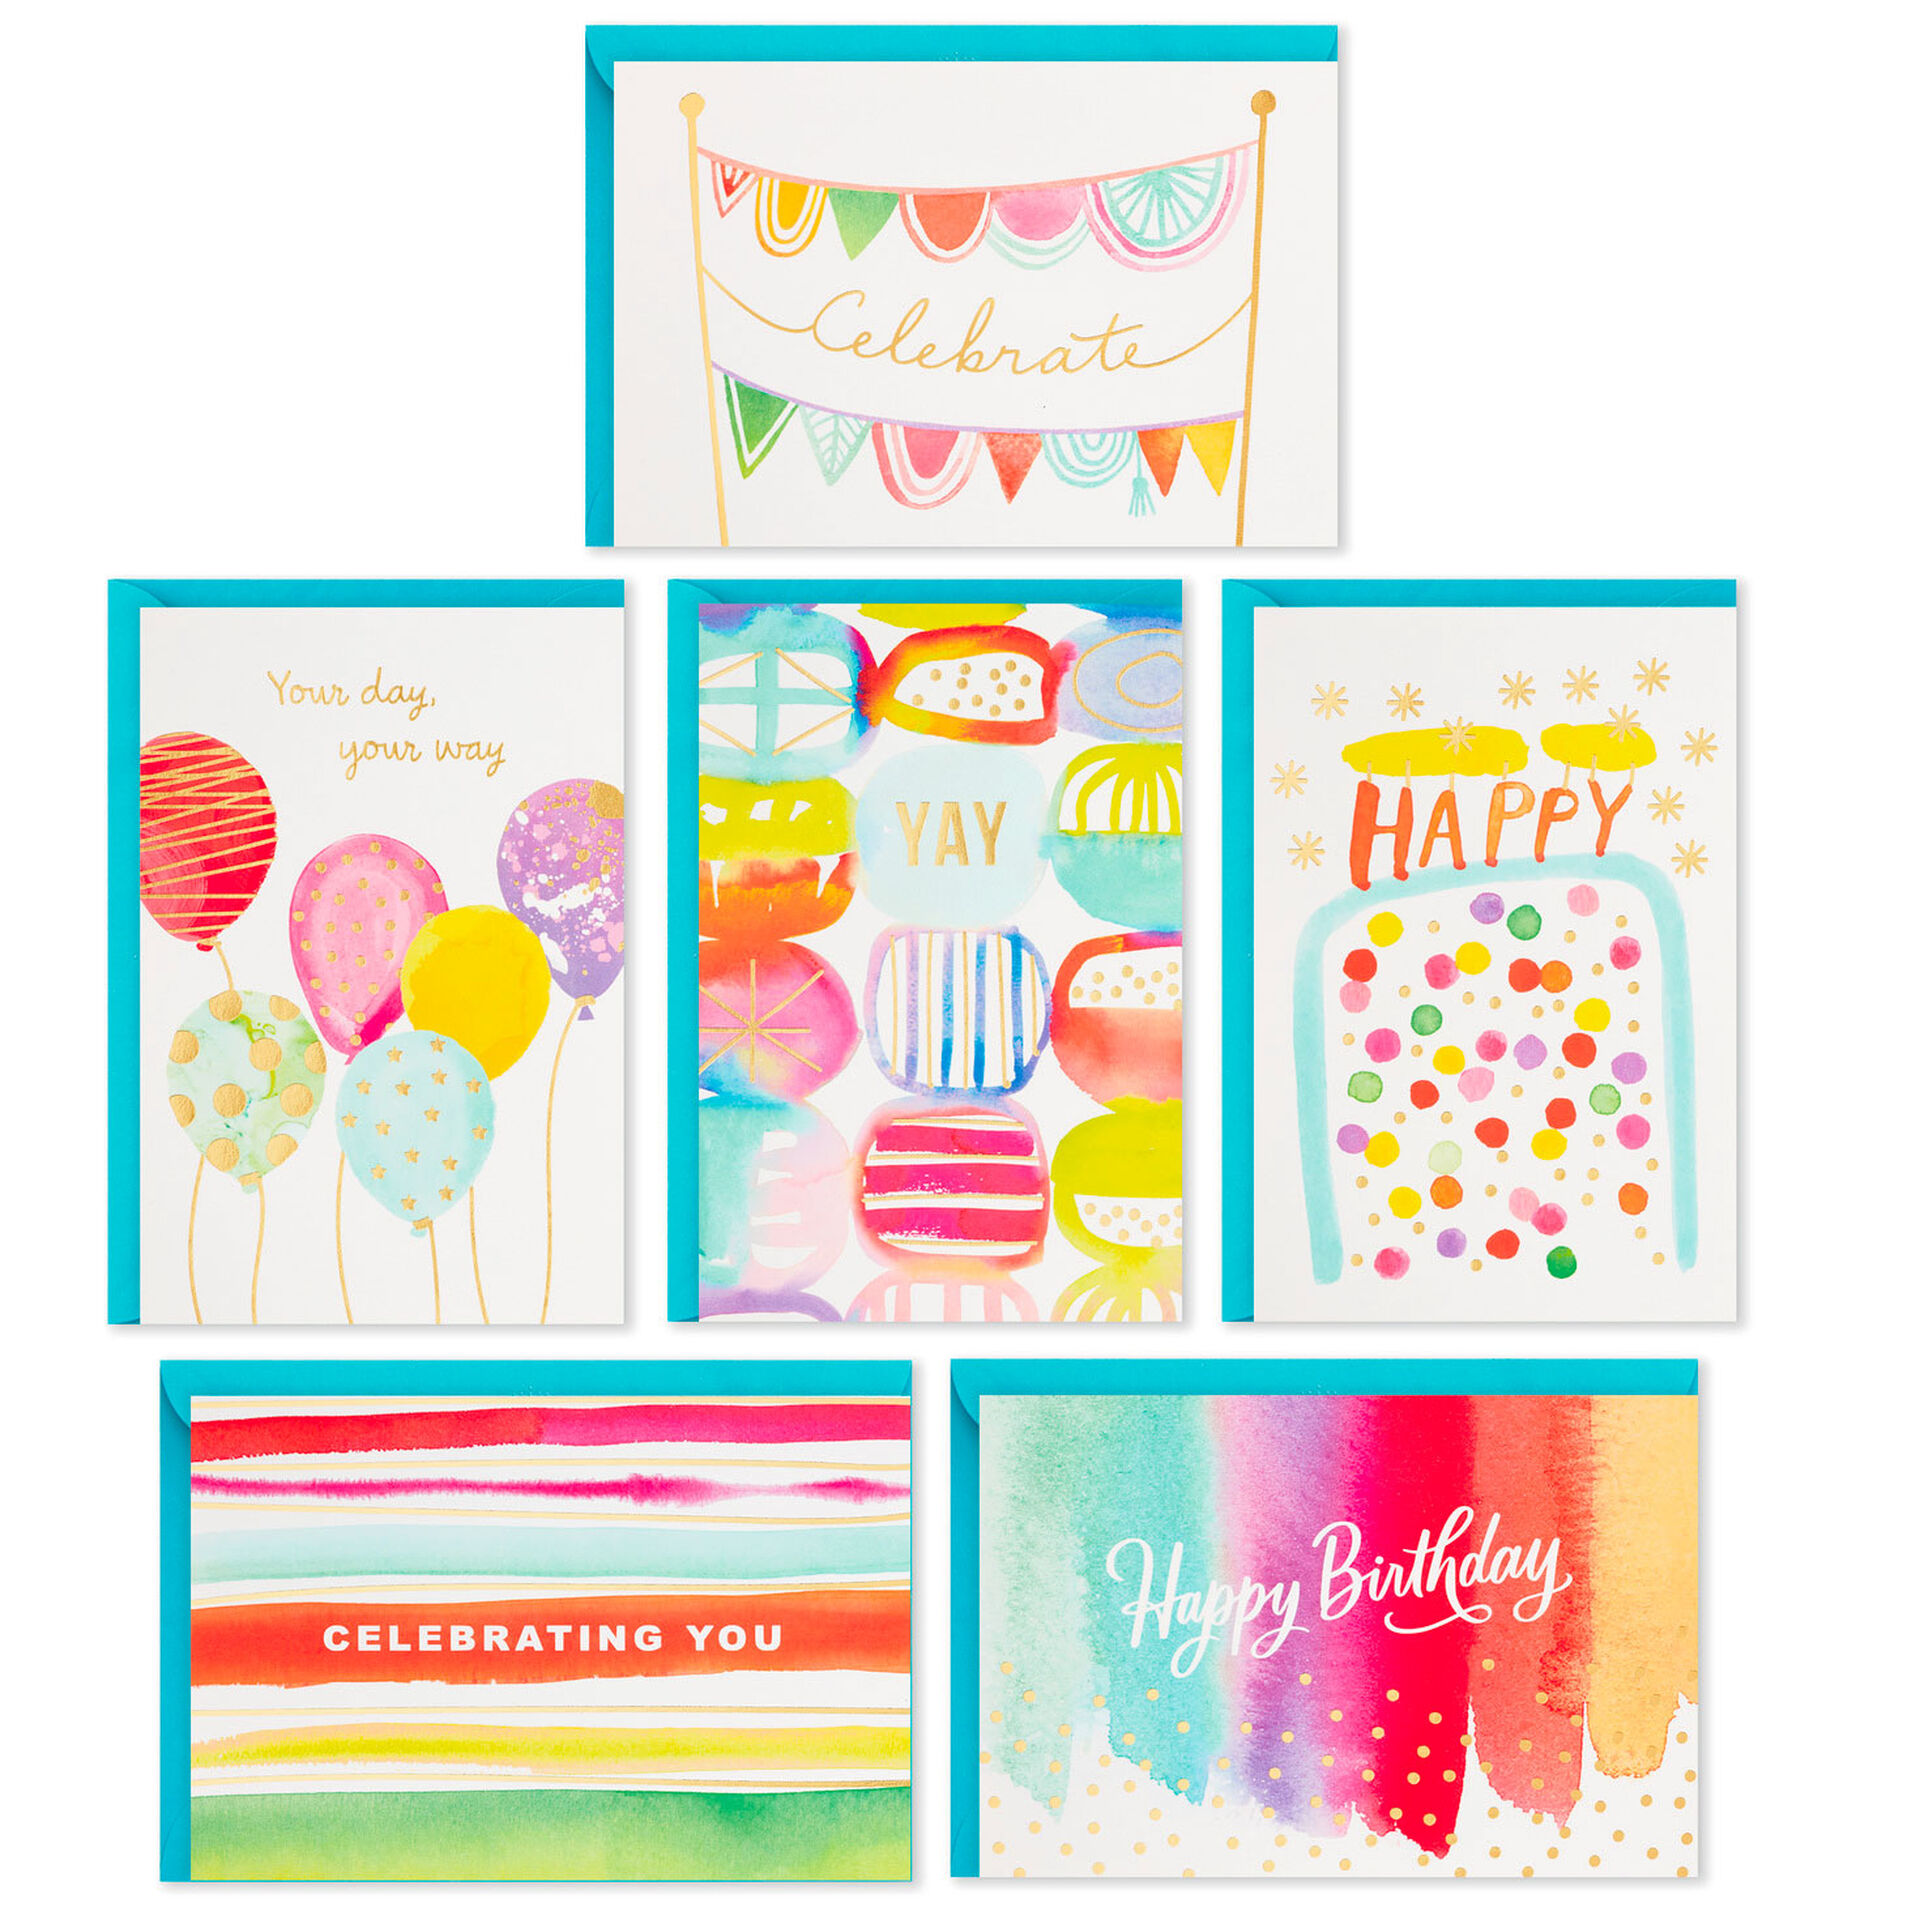 Assorted-Bright-Watercolor-Boxed-Birthday-Cards_5STZ1107_01